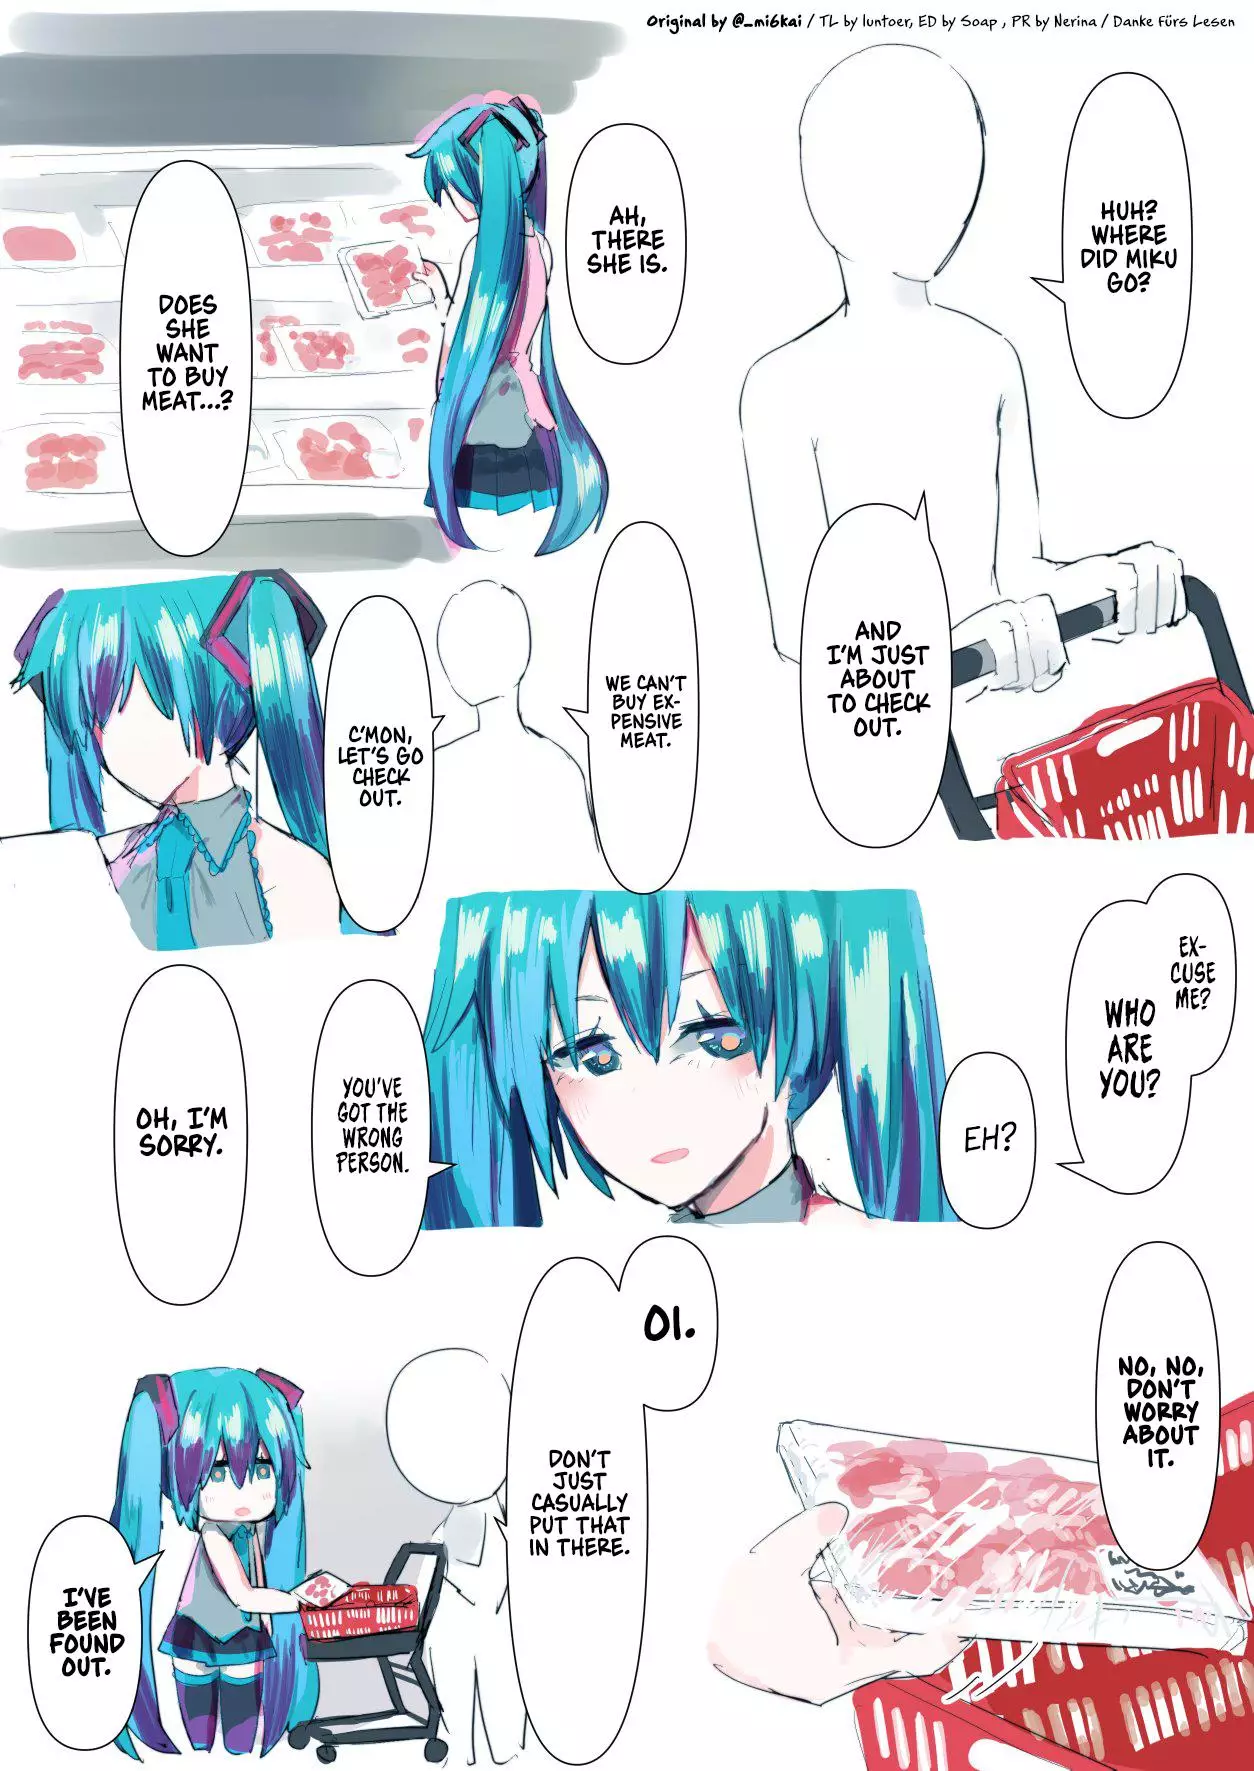 The Daily Life Of Master & Hatsune Miku - 31 page 1-3dceb8bd